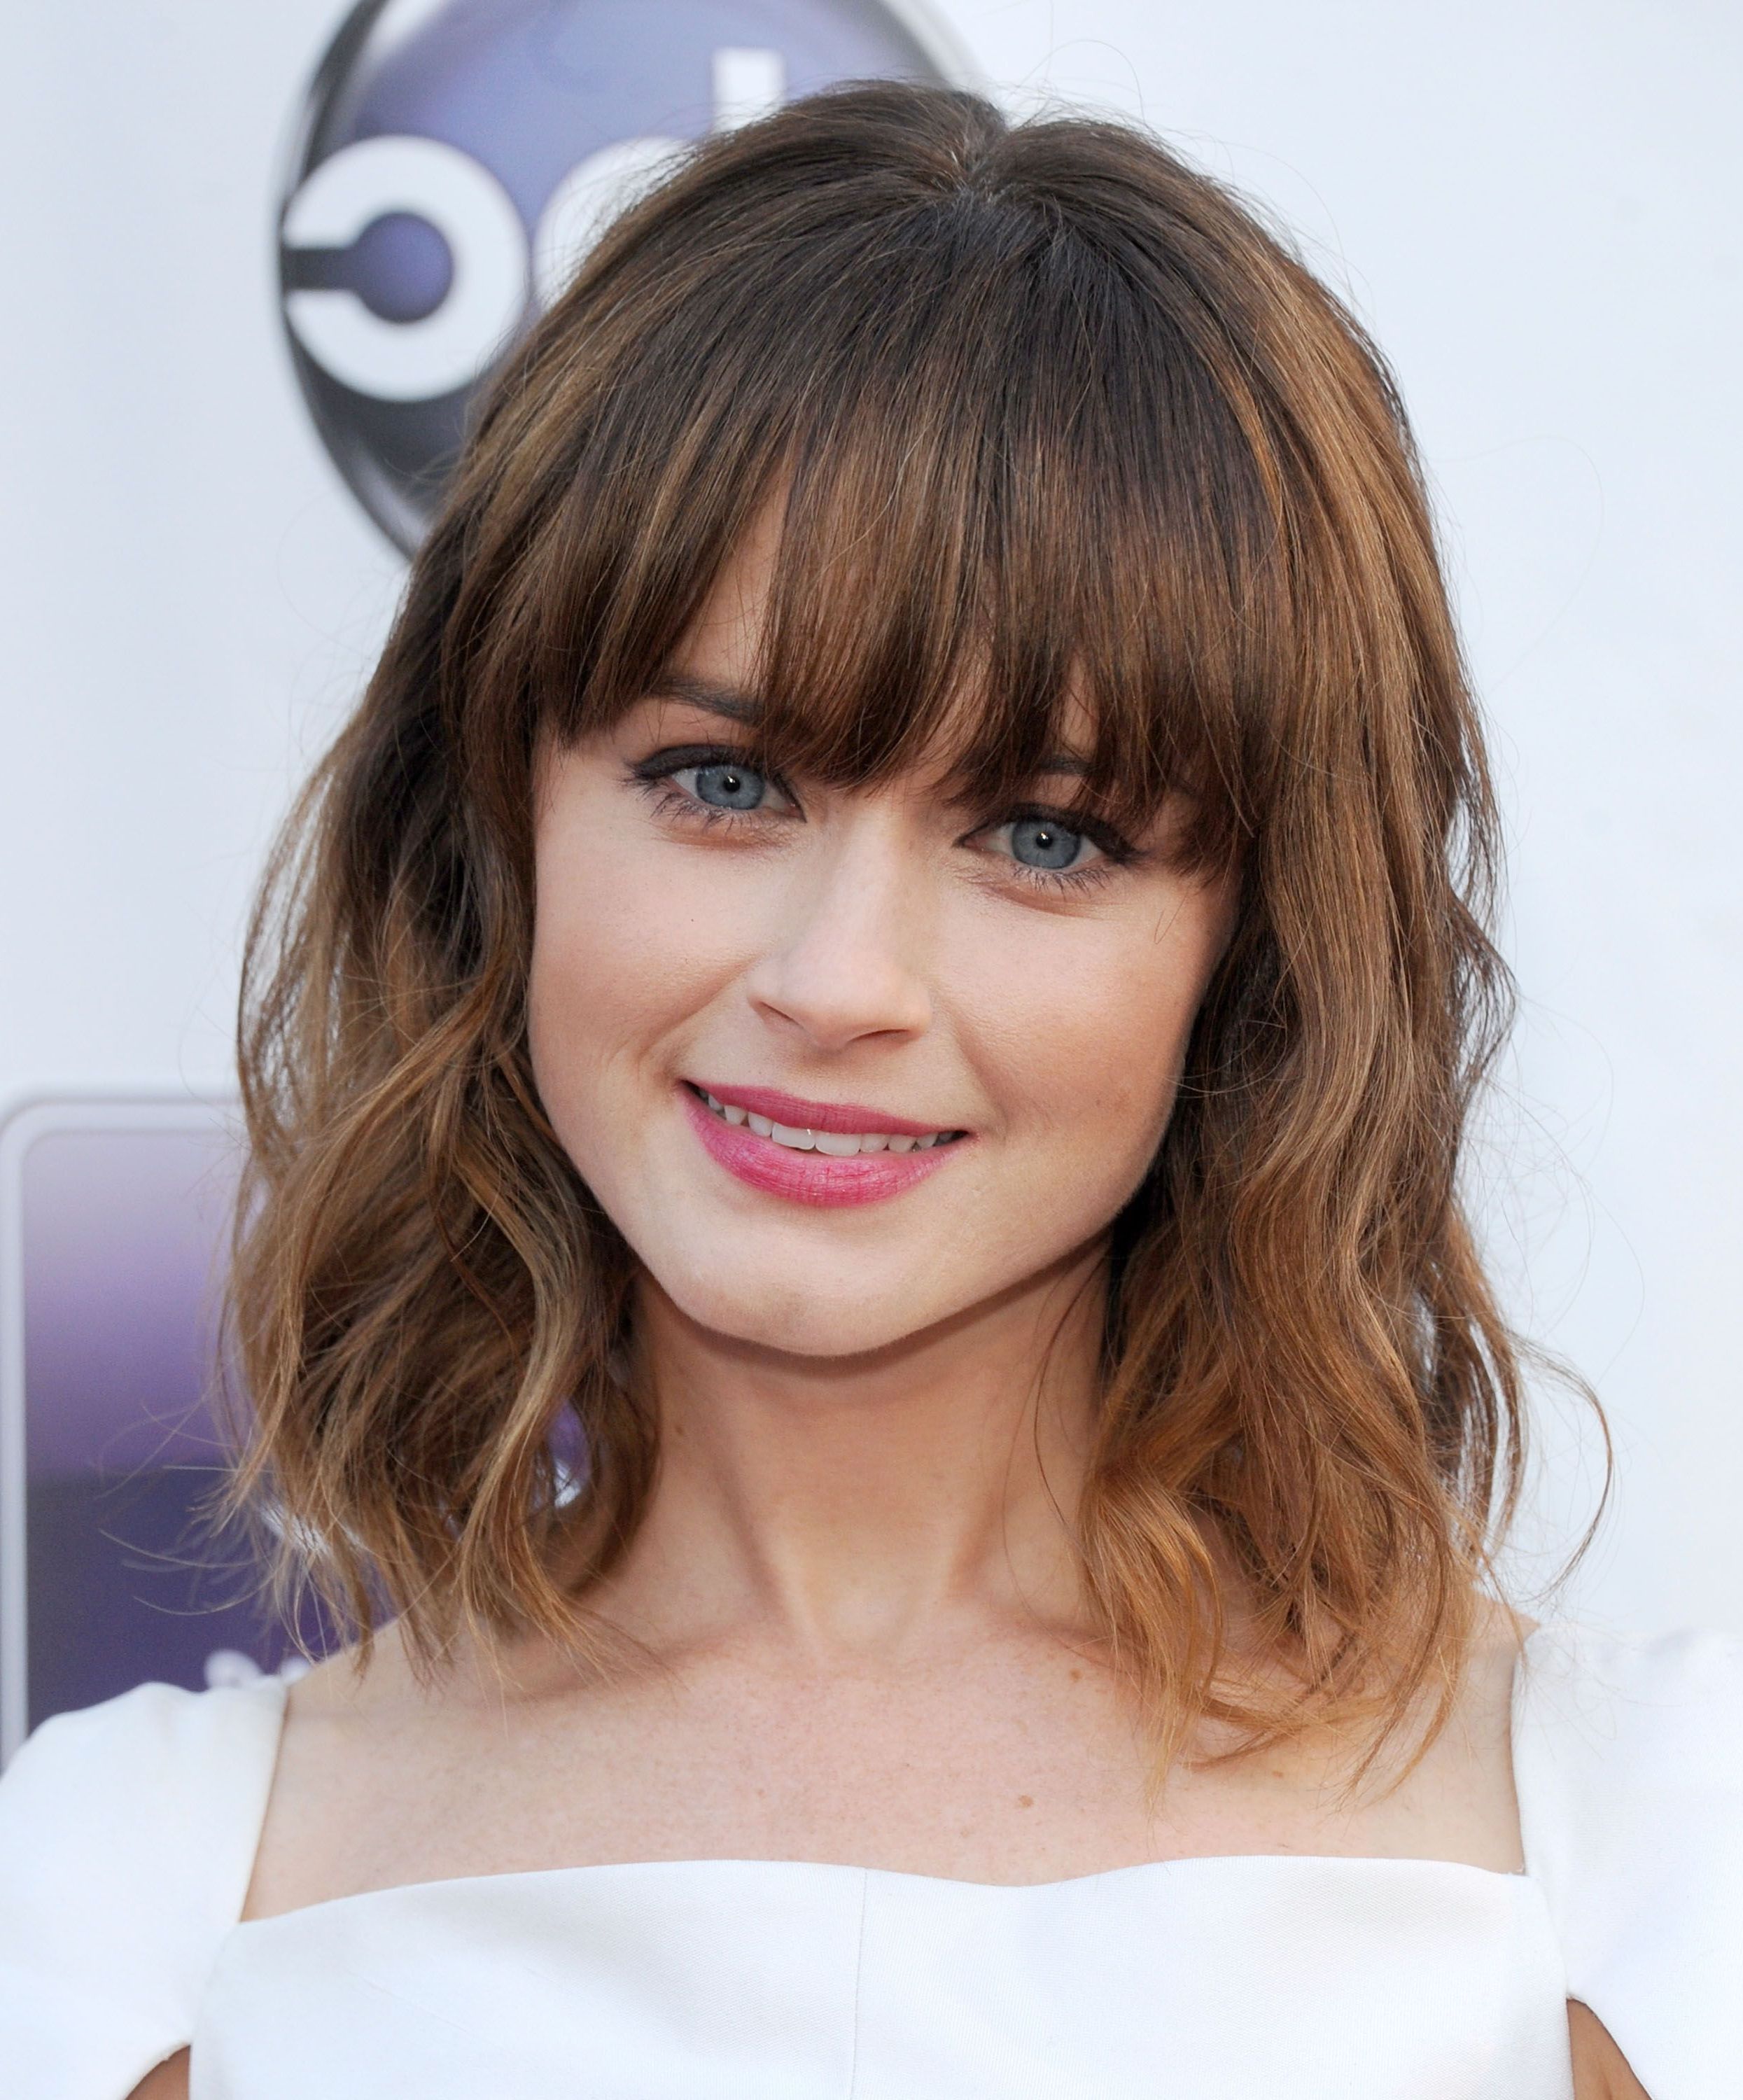 35 Best Hairstyles With Bangs – Photos Of Celebrity Haircuts With Bangs For 2017 Ladies Medium Hairstyles With Fringe (View 8 of 20)